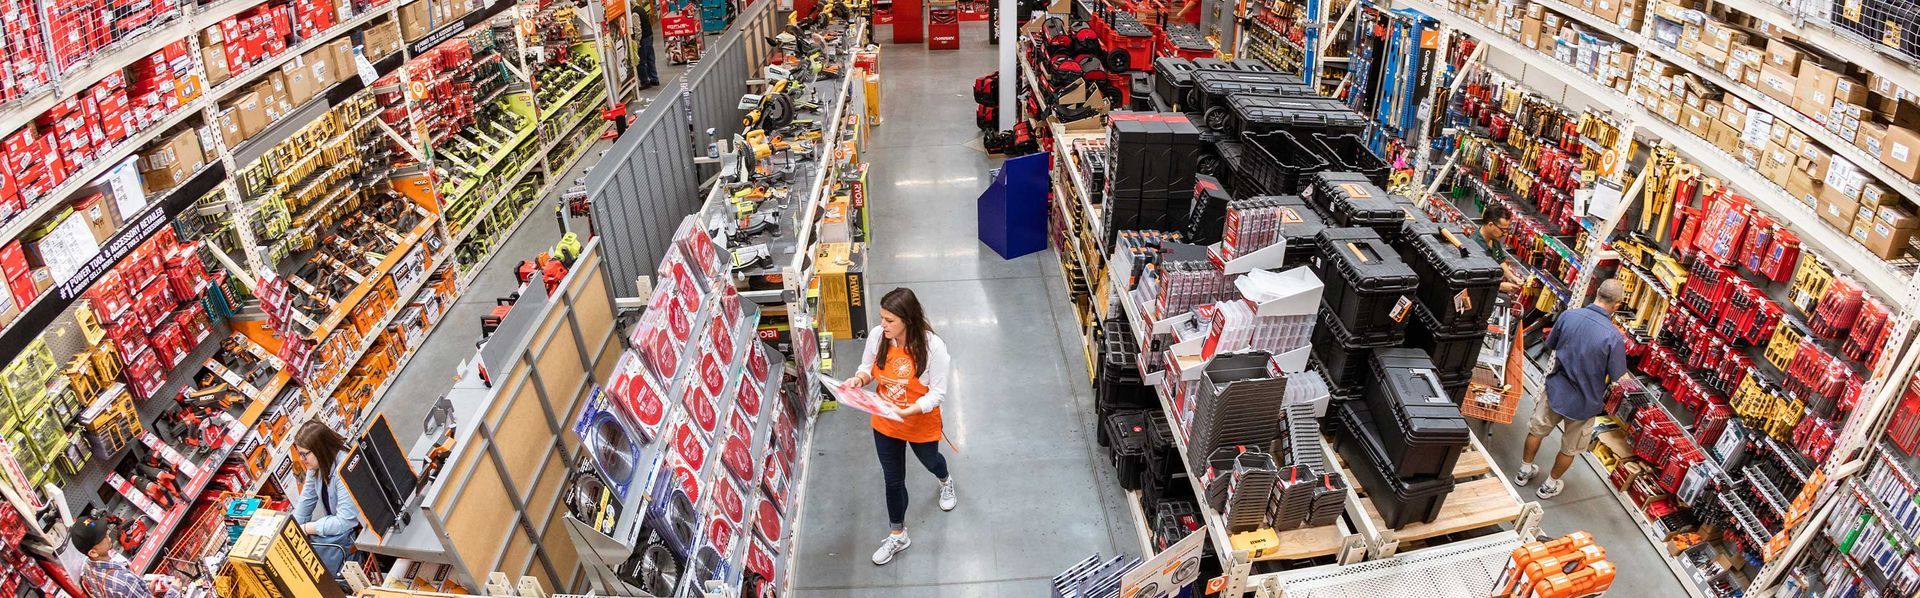 World's Largest Home Improvement Retailer: world record in Cobb County, Georgia